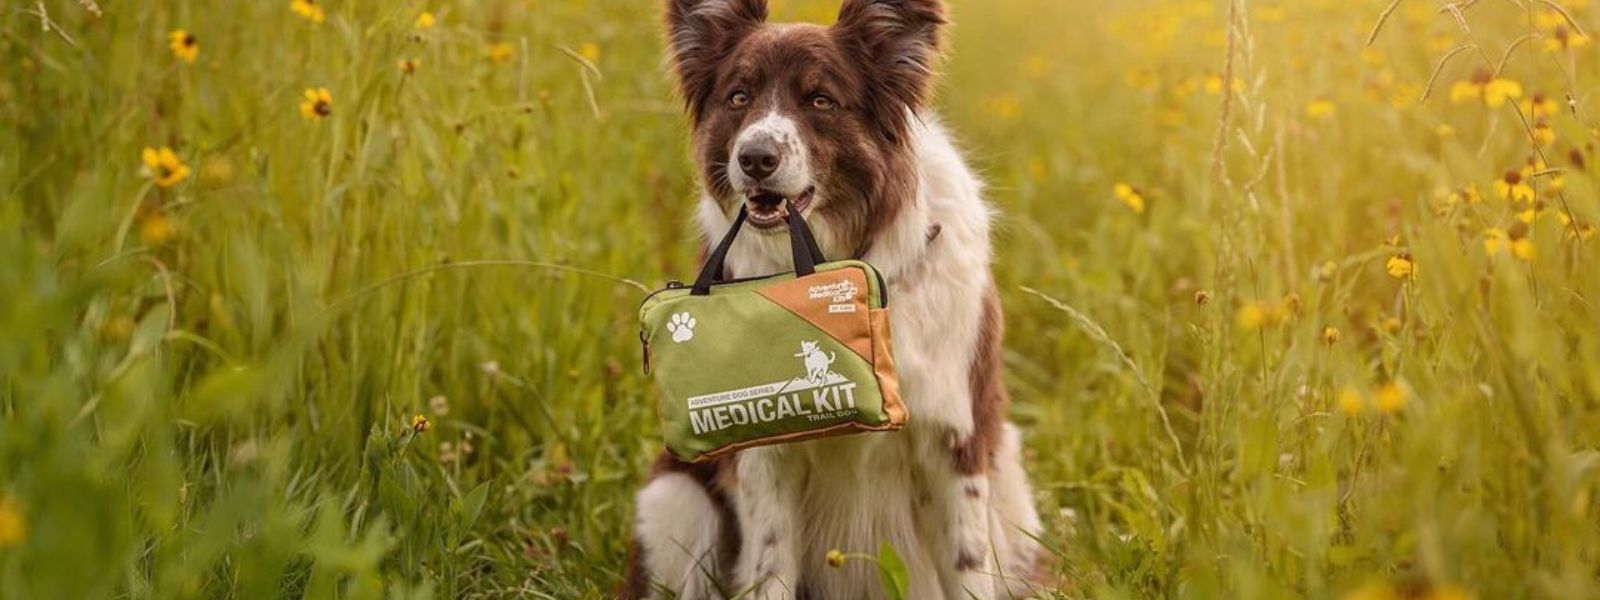 Dog holding Adventure Dog Kit in mouth in field